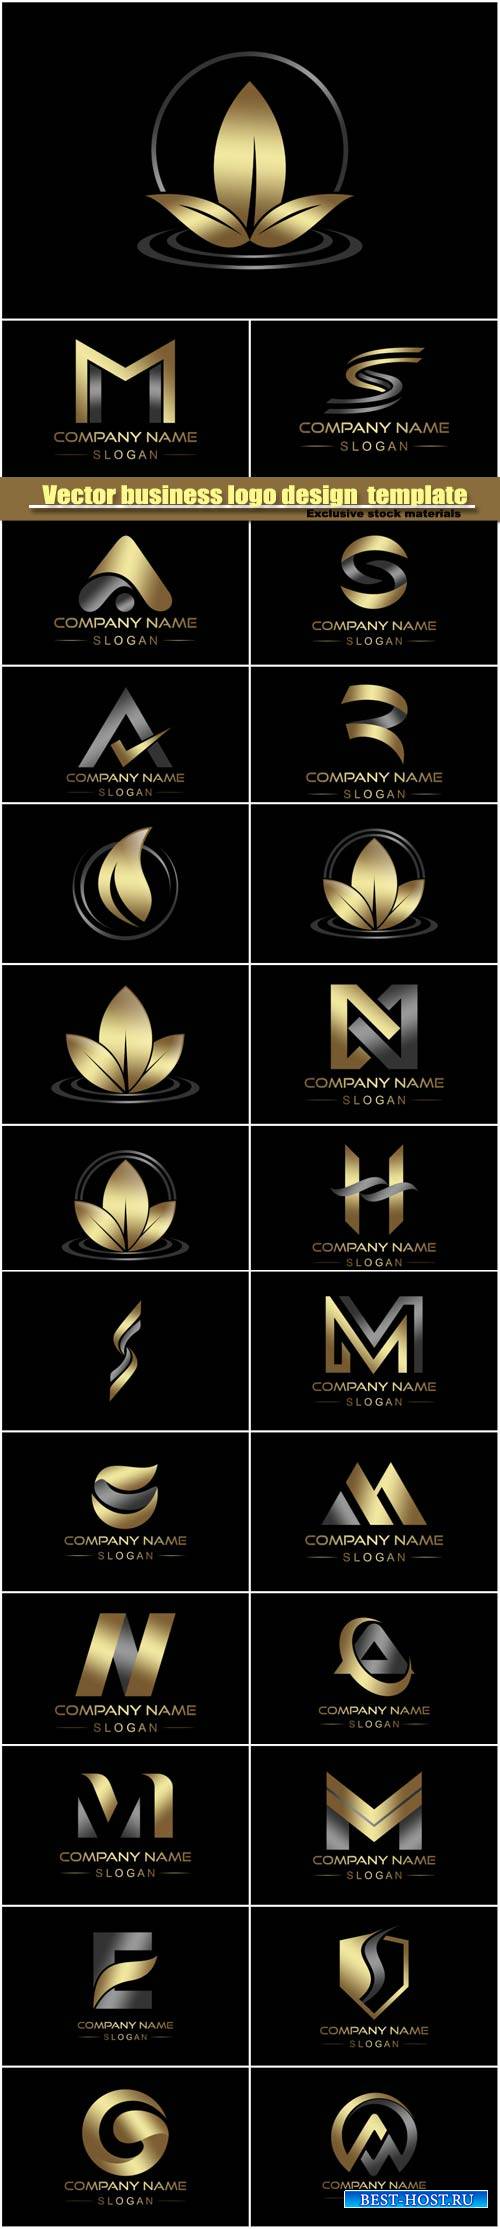 Vector business logo design  template on a black background